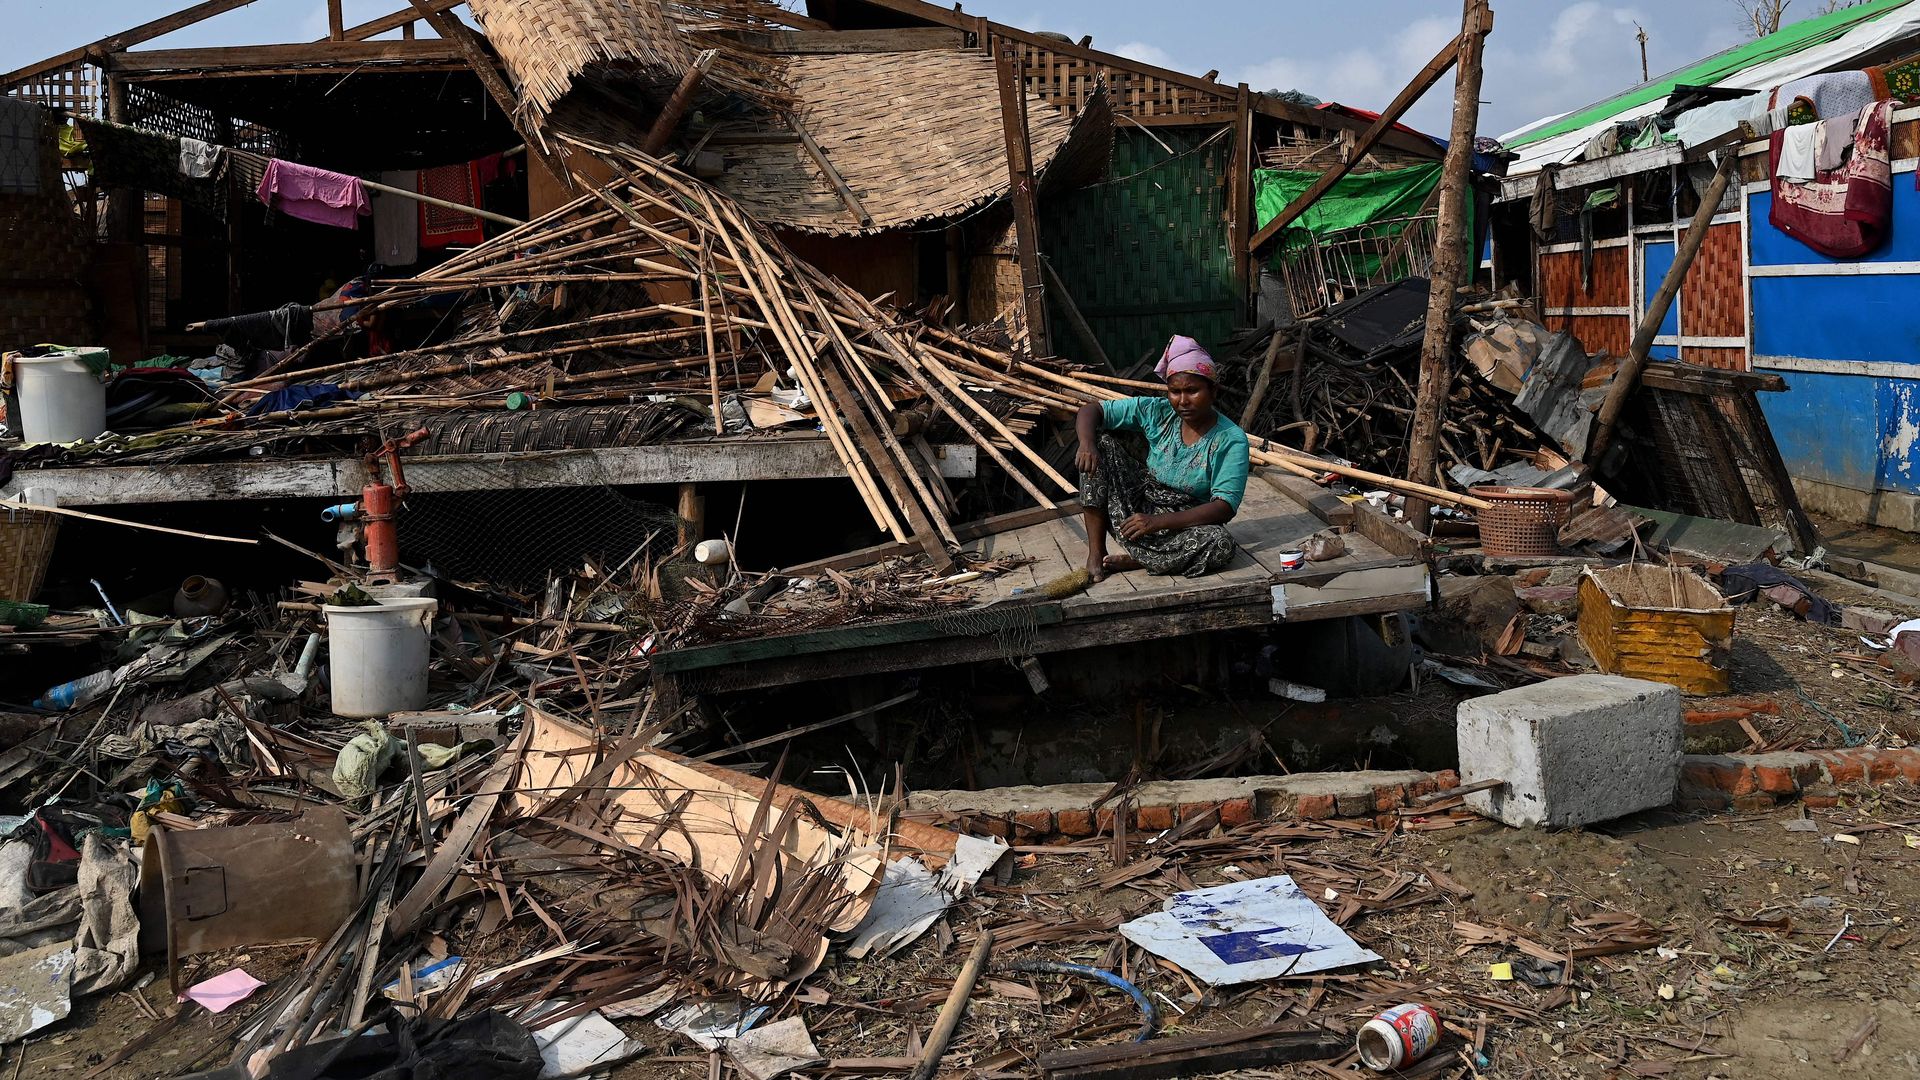 A Rohingya woman sits by her destroyed house at Ohn Taw Chay refugee camp in Sittwe, Myanmar, on May 16, in the aftermath of Cyclone Mocha's landfall.